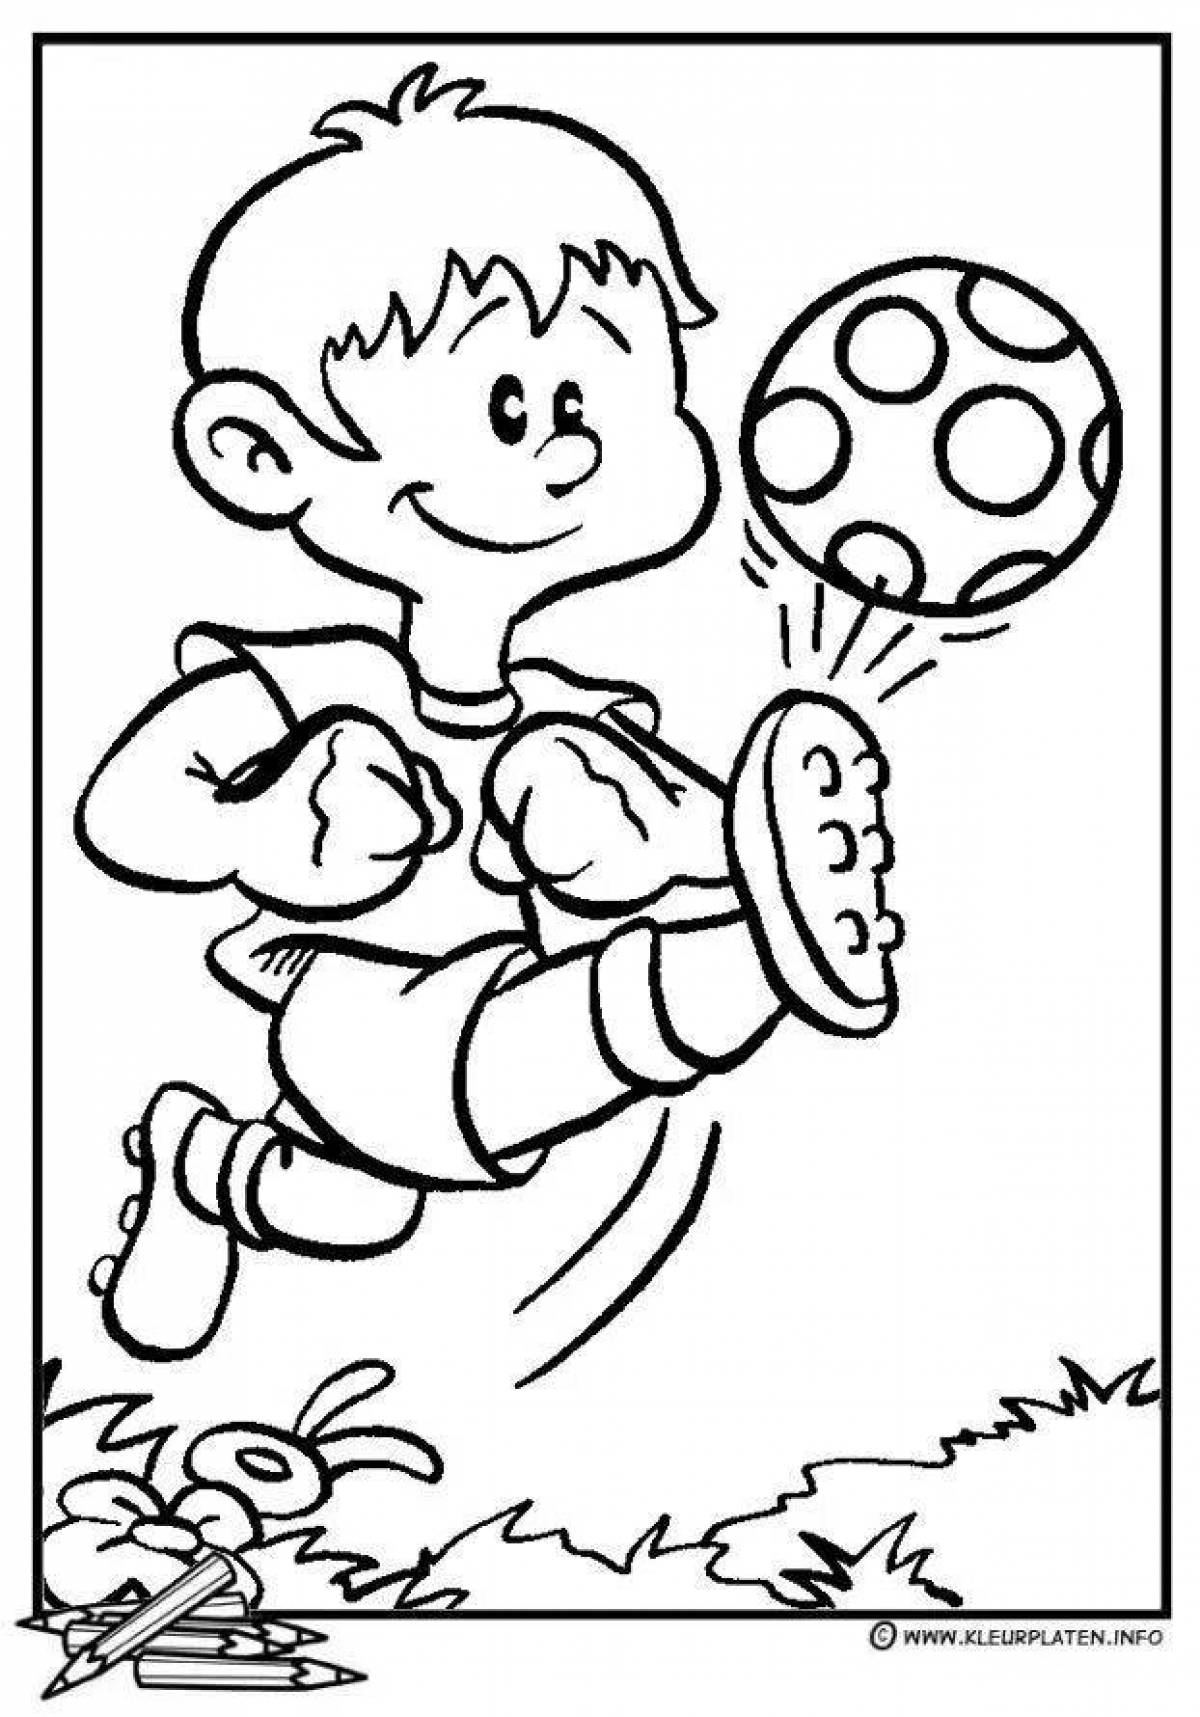 Animated sports coloring pages